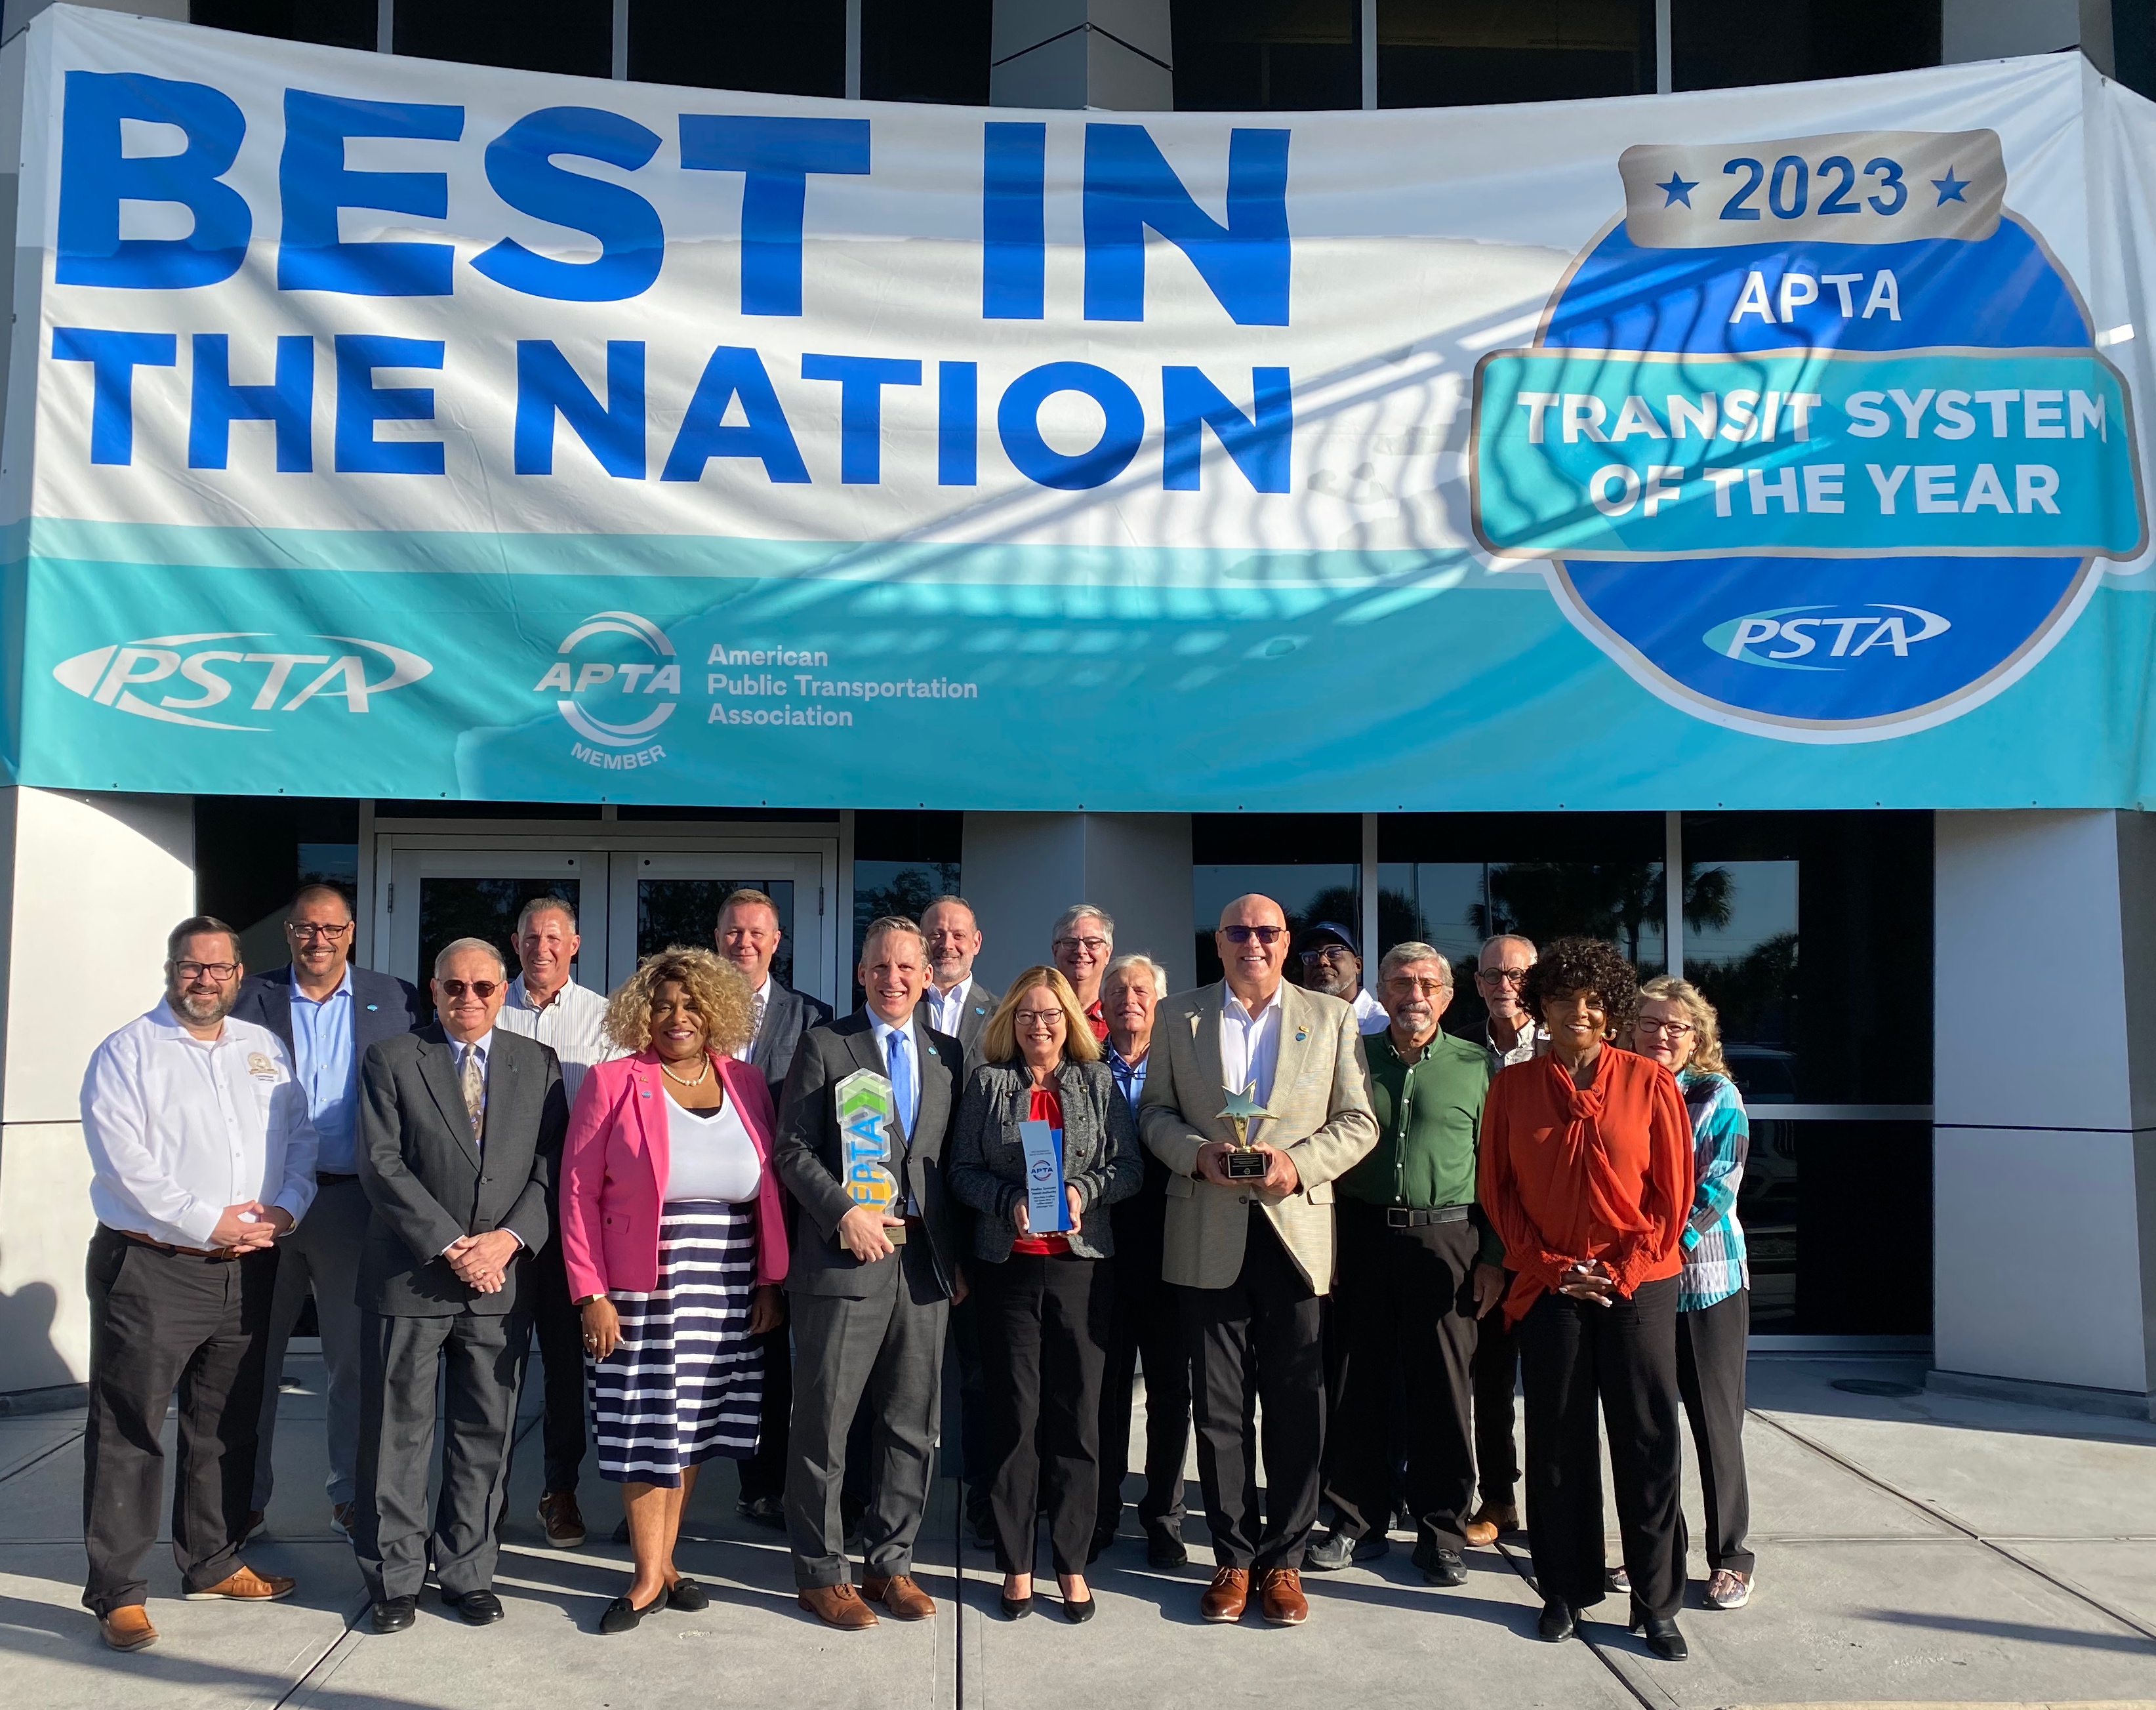 PSTA board members in front of the banner that says "Best in the Nation" with the APTA System of the Year 2023 emblem